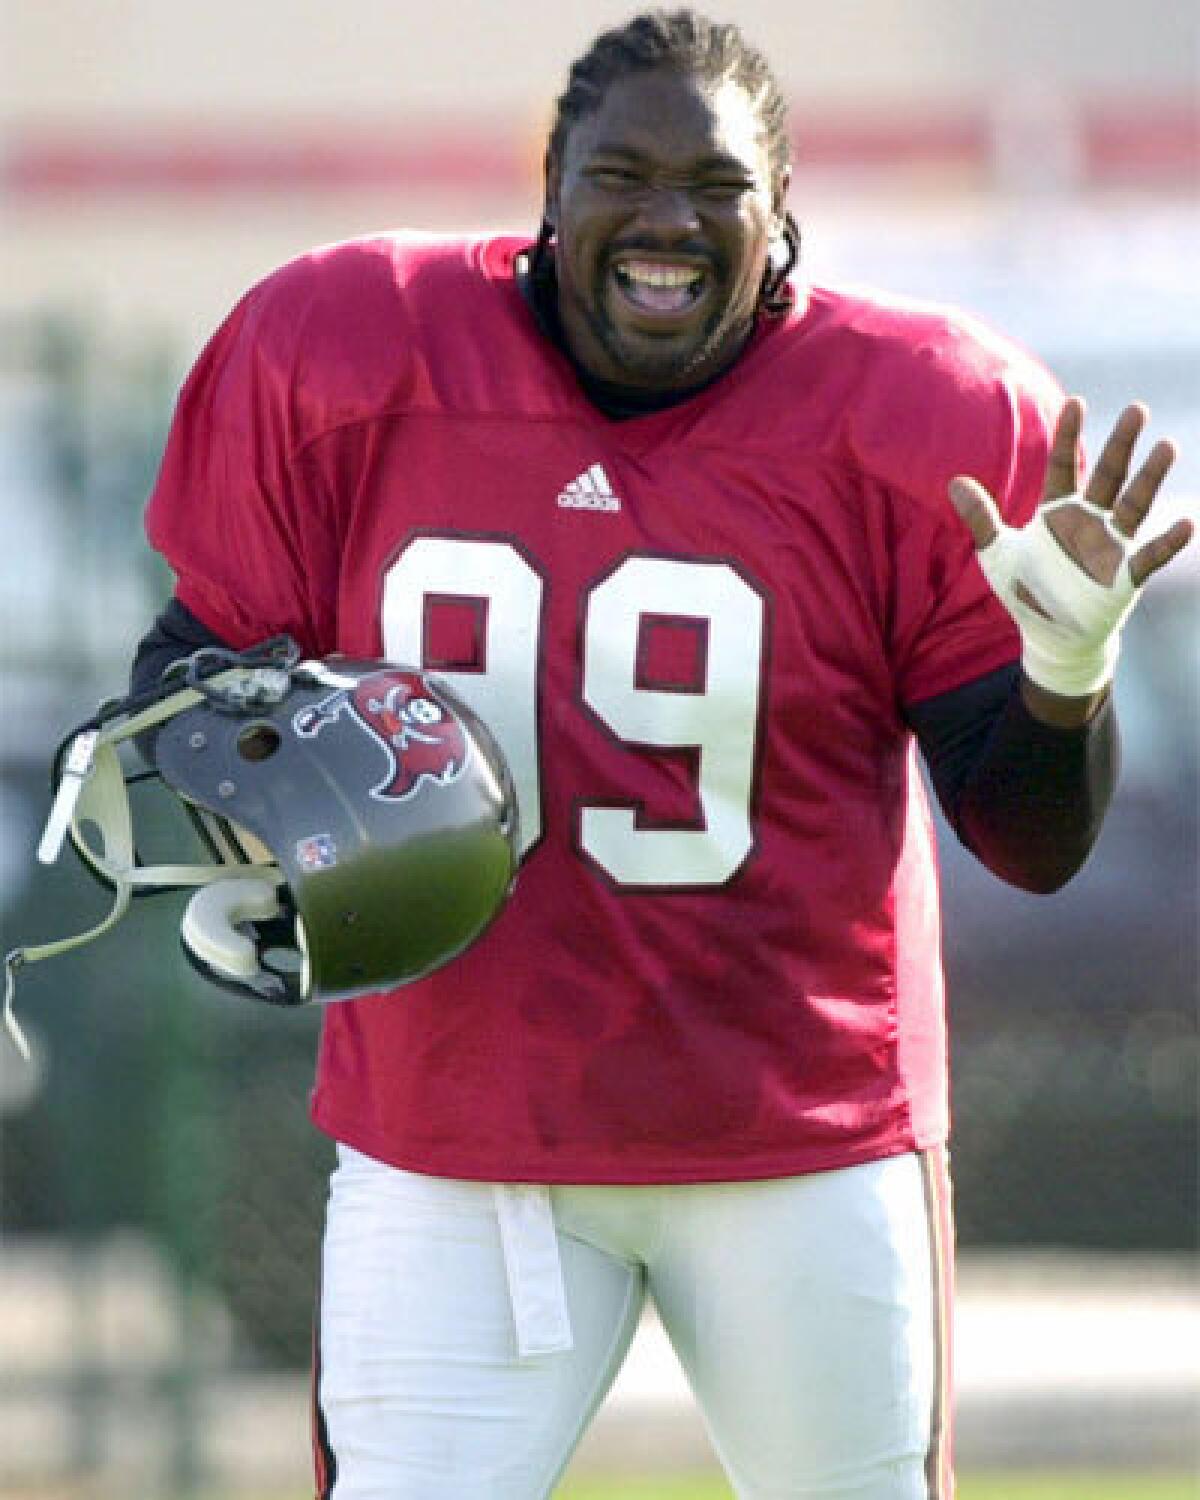 Warren Sapp during the first day of Tampa Bay Buccaneers training camp in 2001.